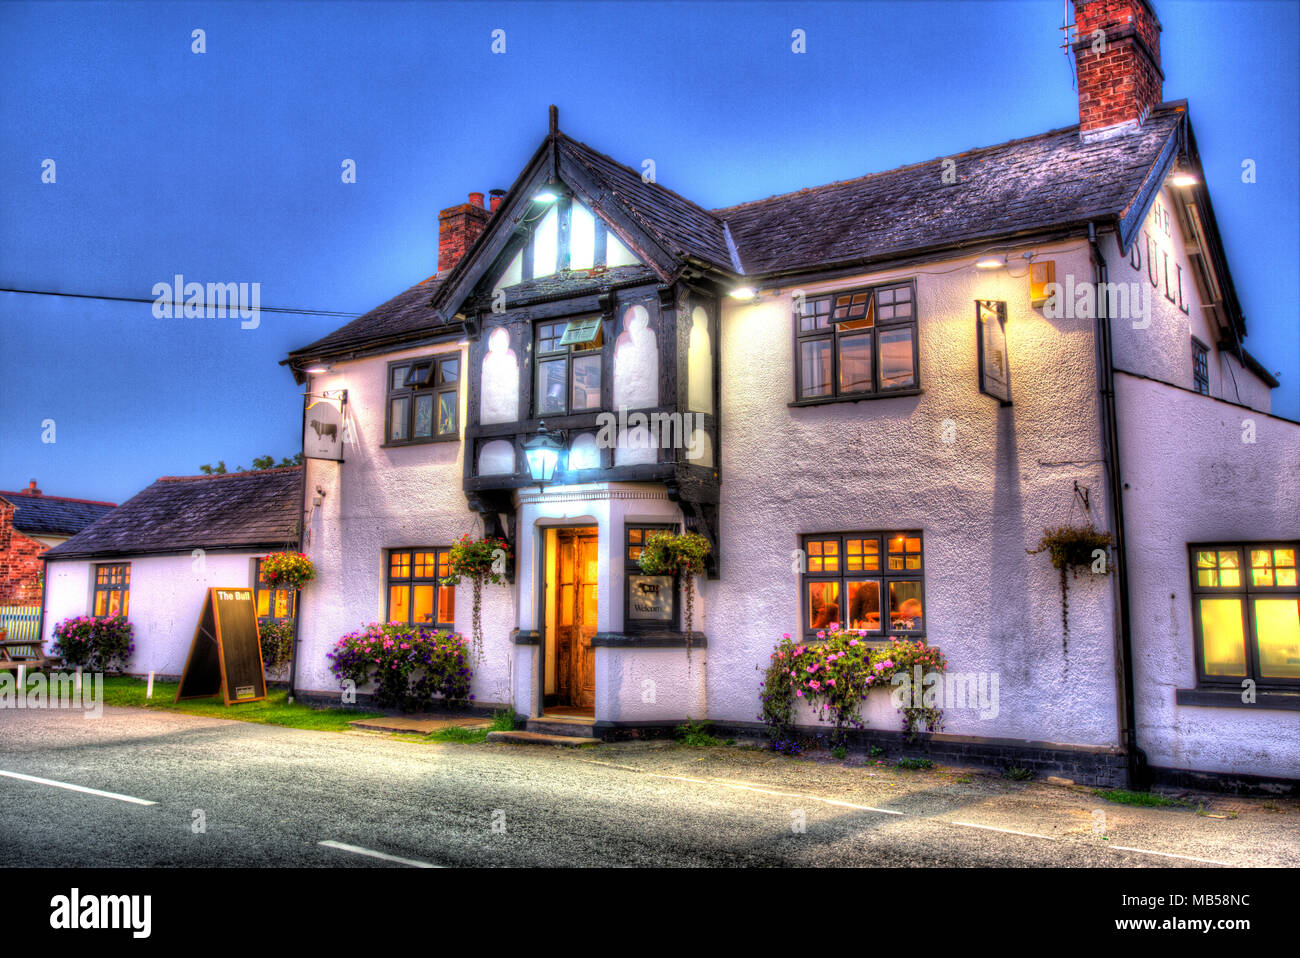 Village of Shocklach, Cheshire, England. Artistic evening view of the Bull Inn public house. Stock Photo